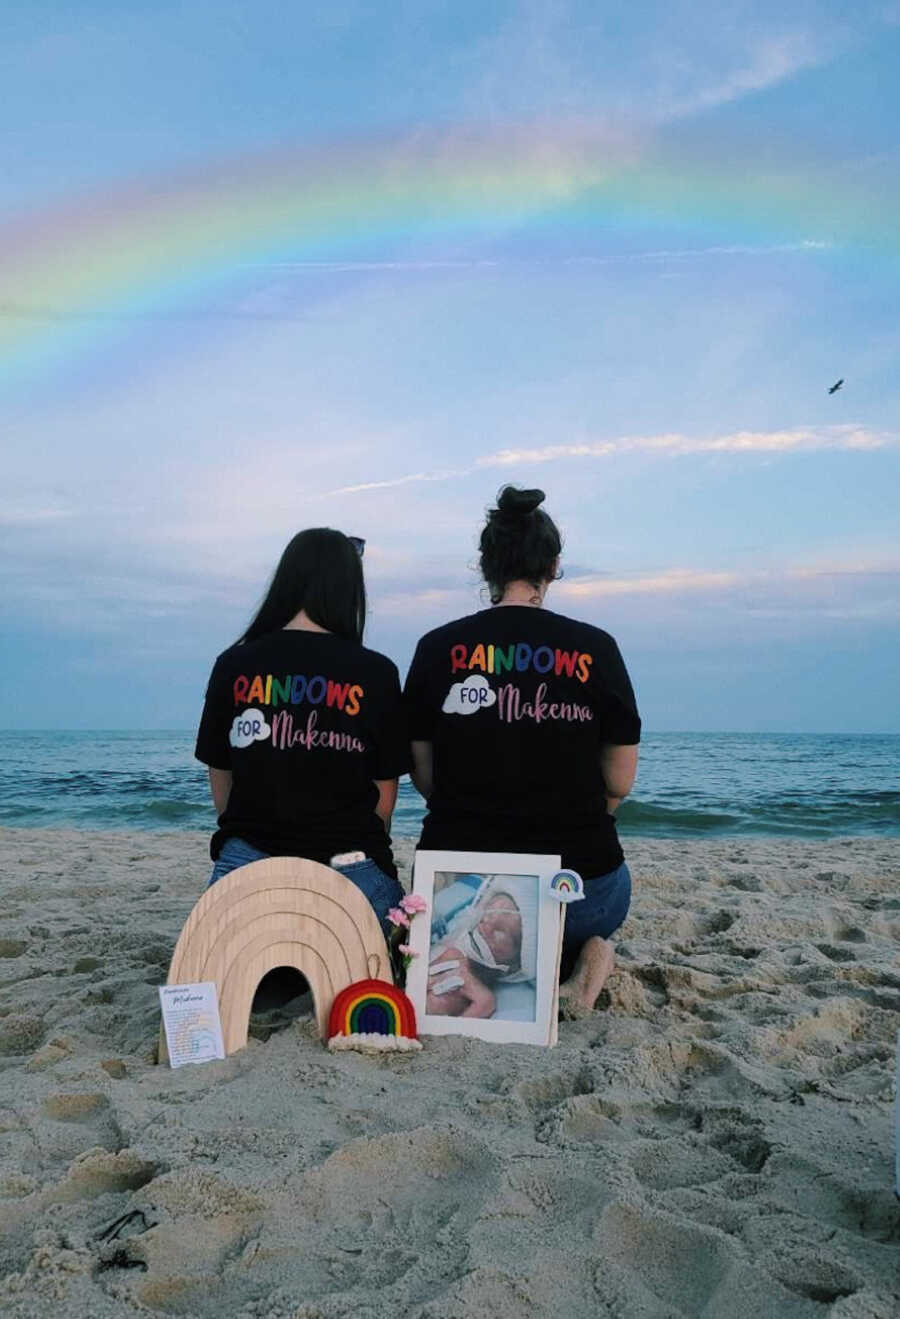 loss mom and loss mom bestie promoting their nonprofits to support loss moms while on beach